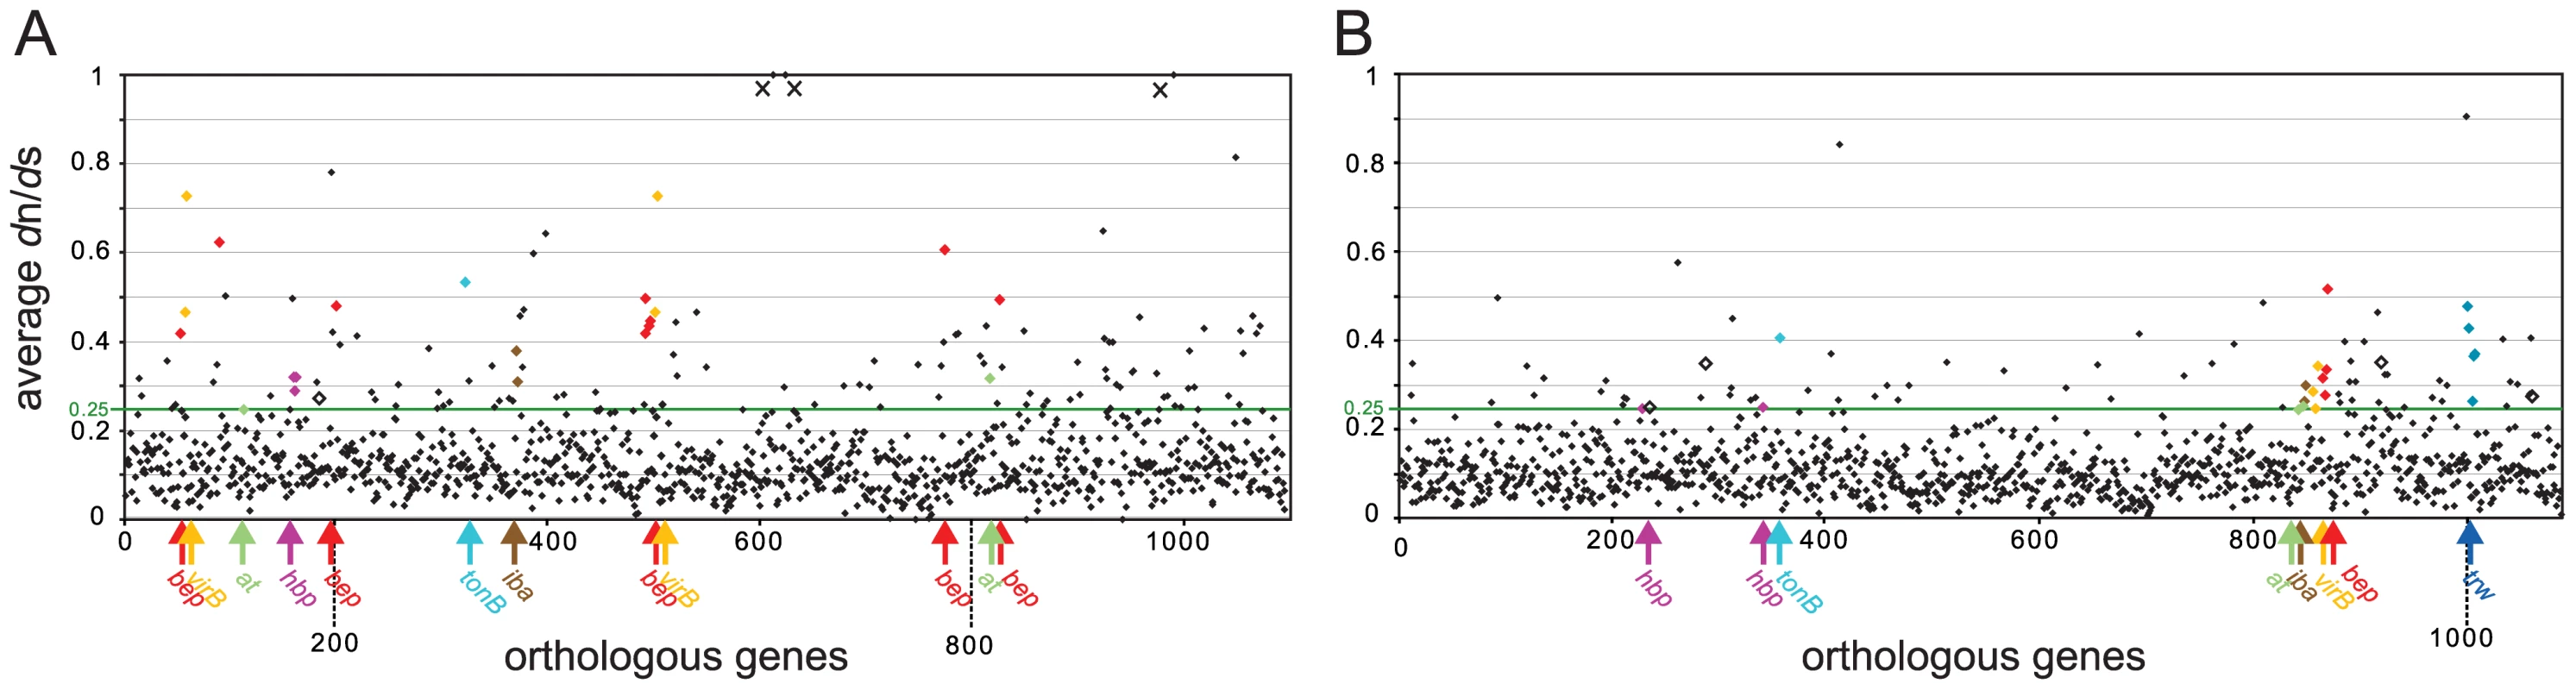 Gene-wide <i>d</i>n/<i>d</i>s analysis of the core genomes of the two radiating lineages.